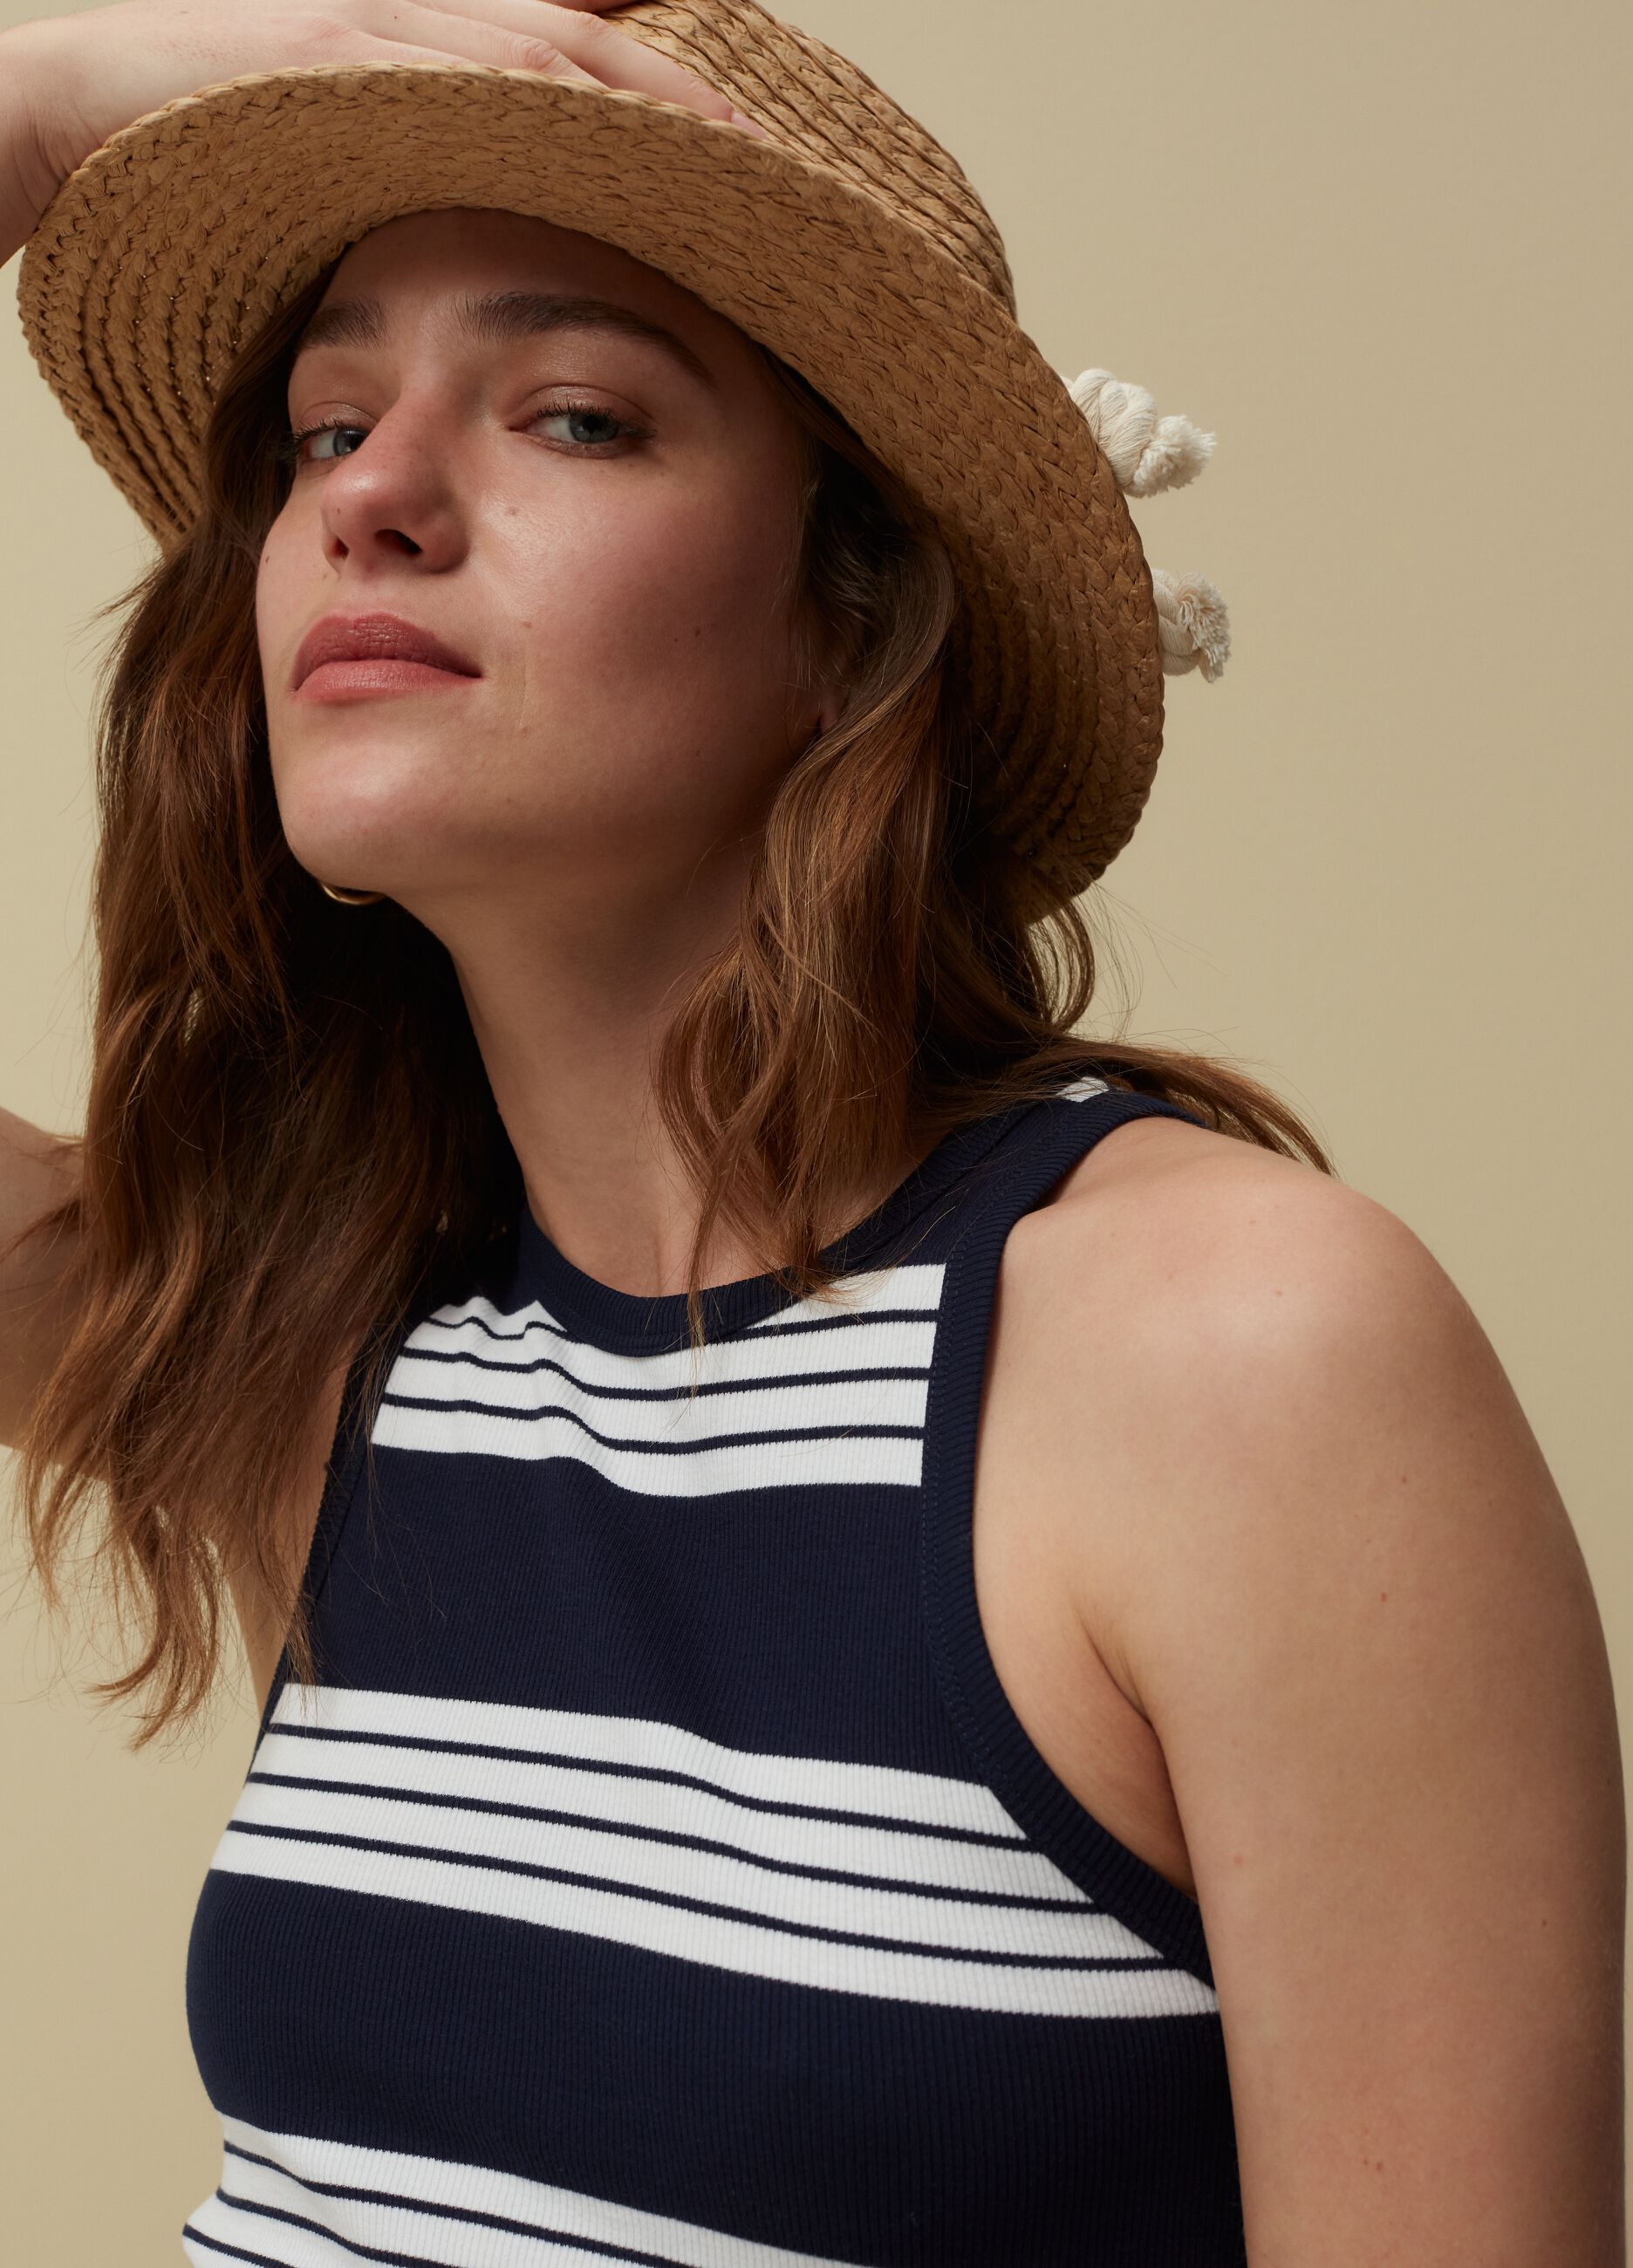 Ribbed tank top with striped pattern.